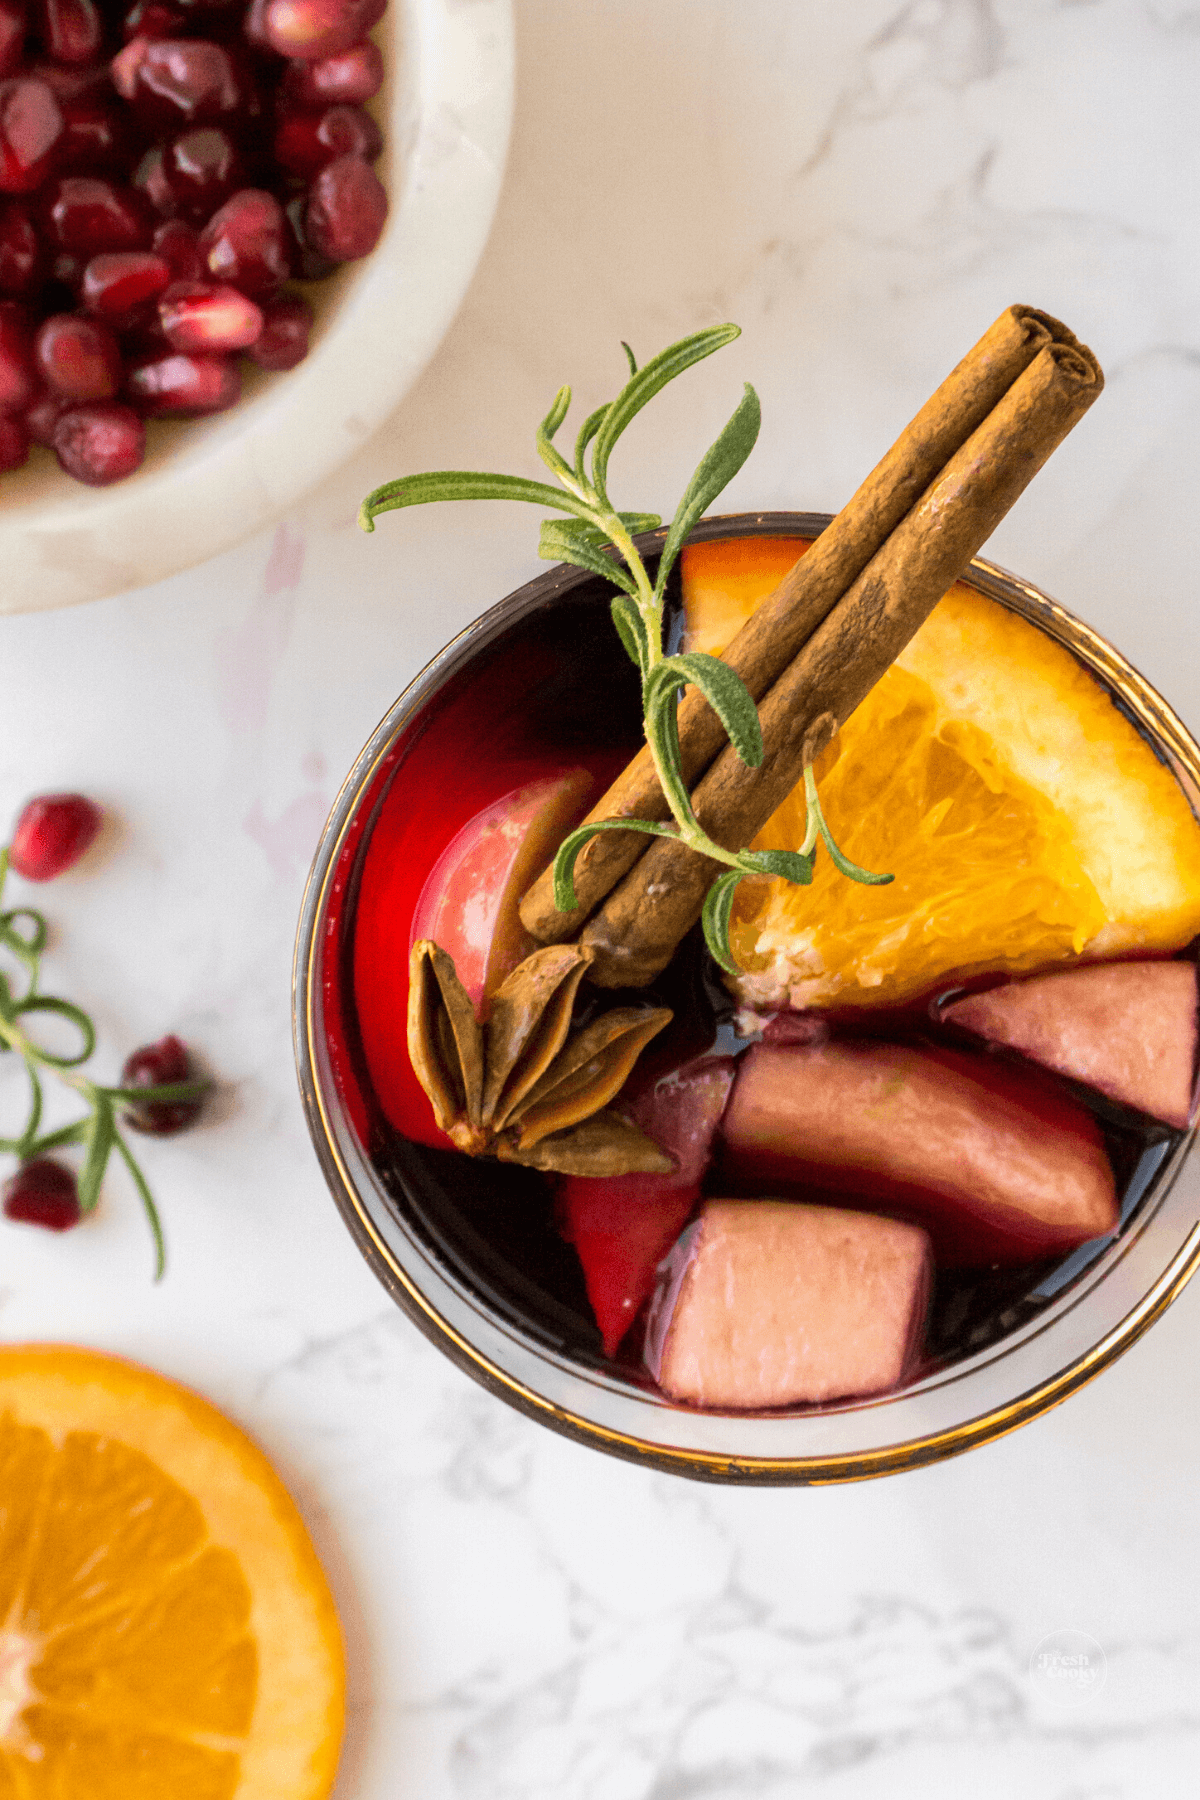 Glass full of fruit, topped with cinnamon spice, anise and rosemary.